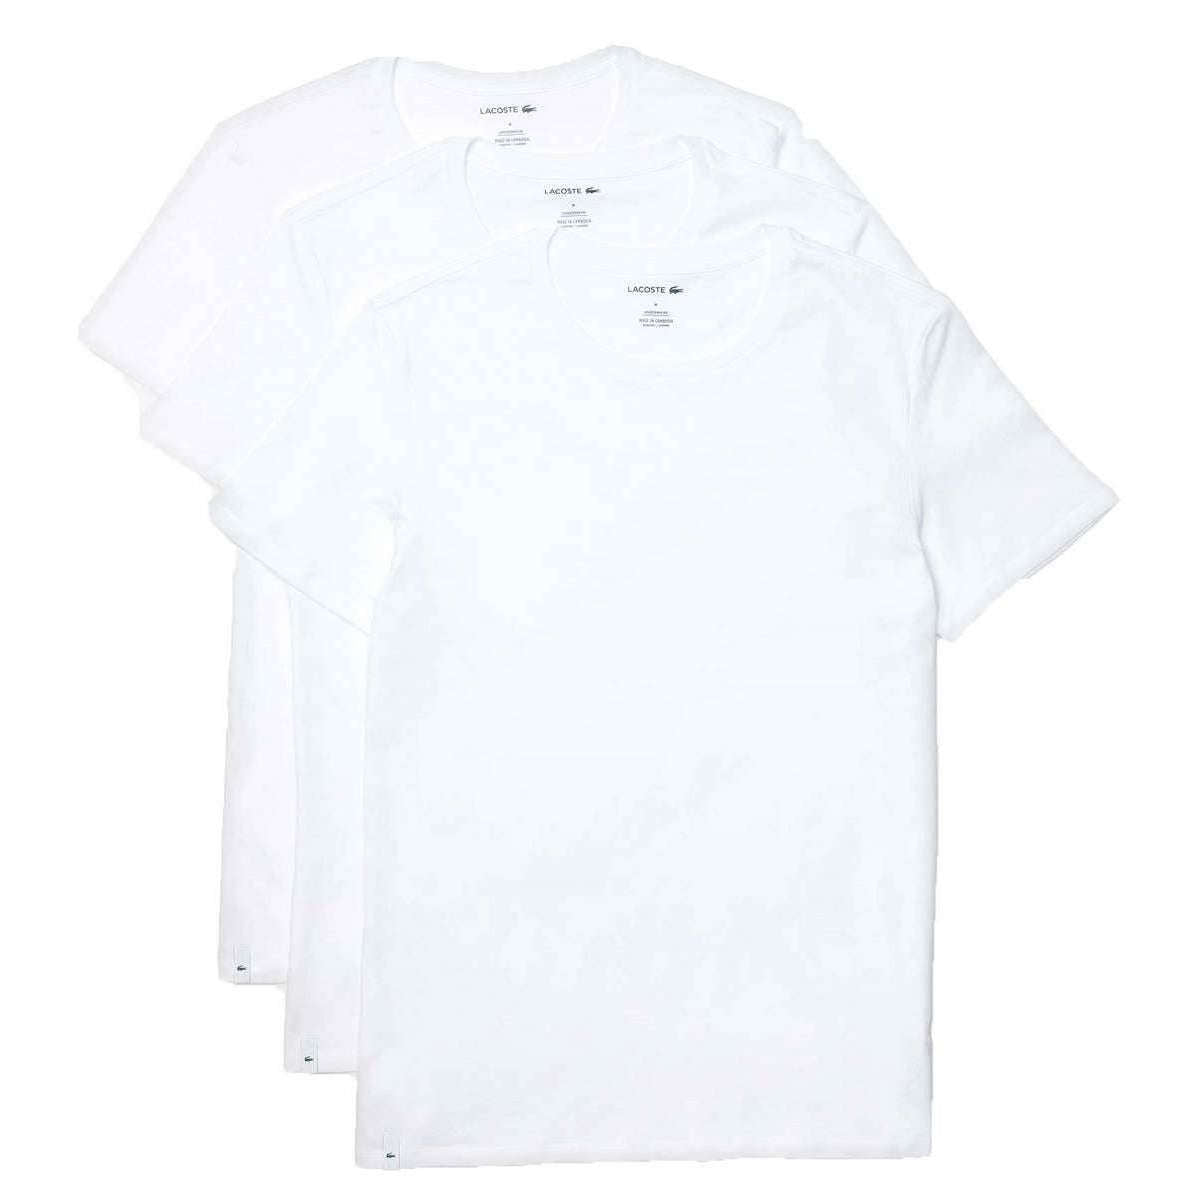 Lacoste Crew Neck Slim 3 Pack T-Shirts - White